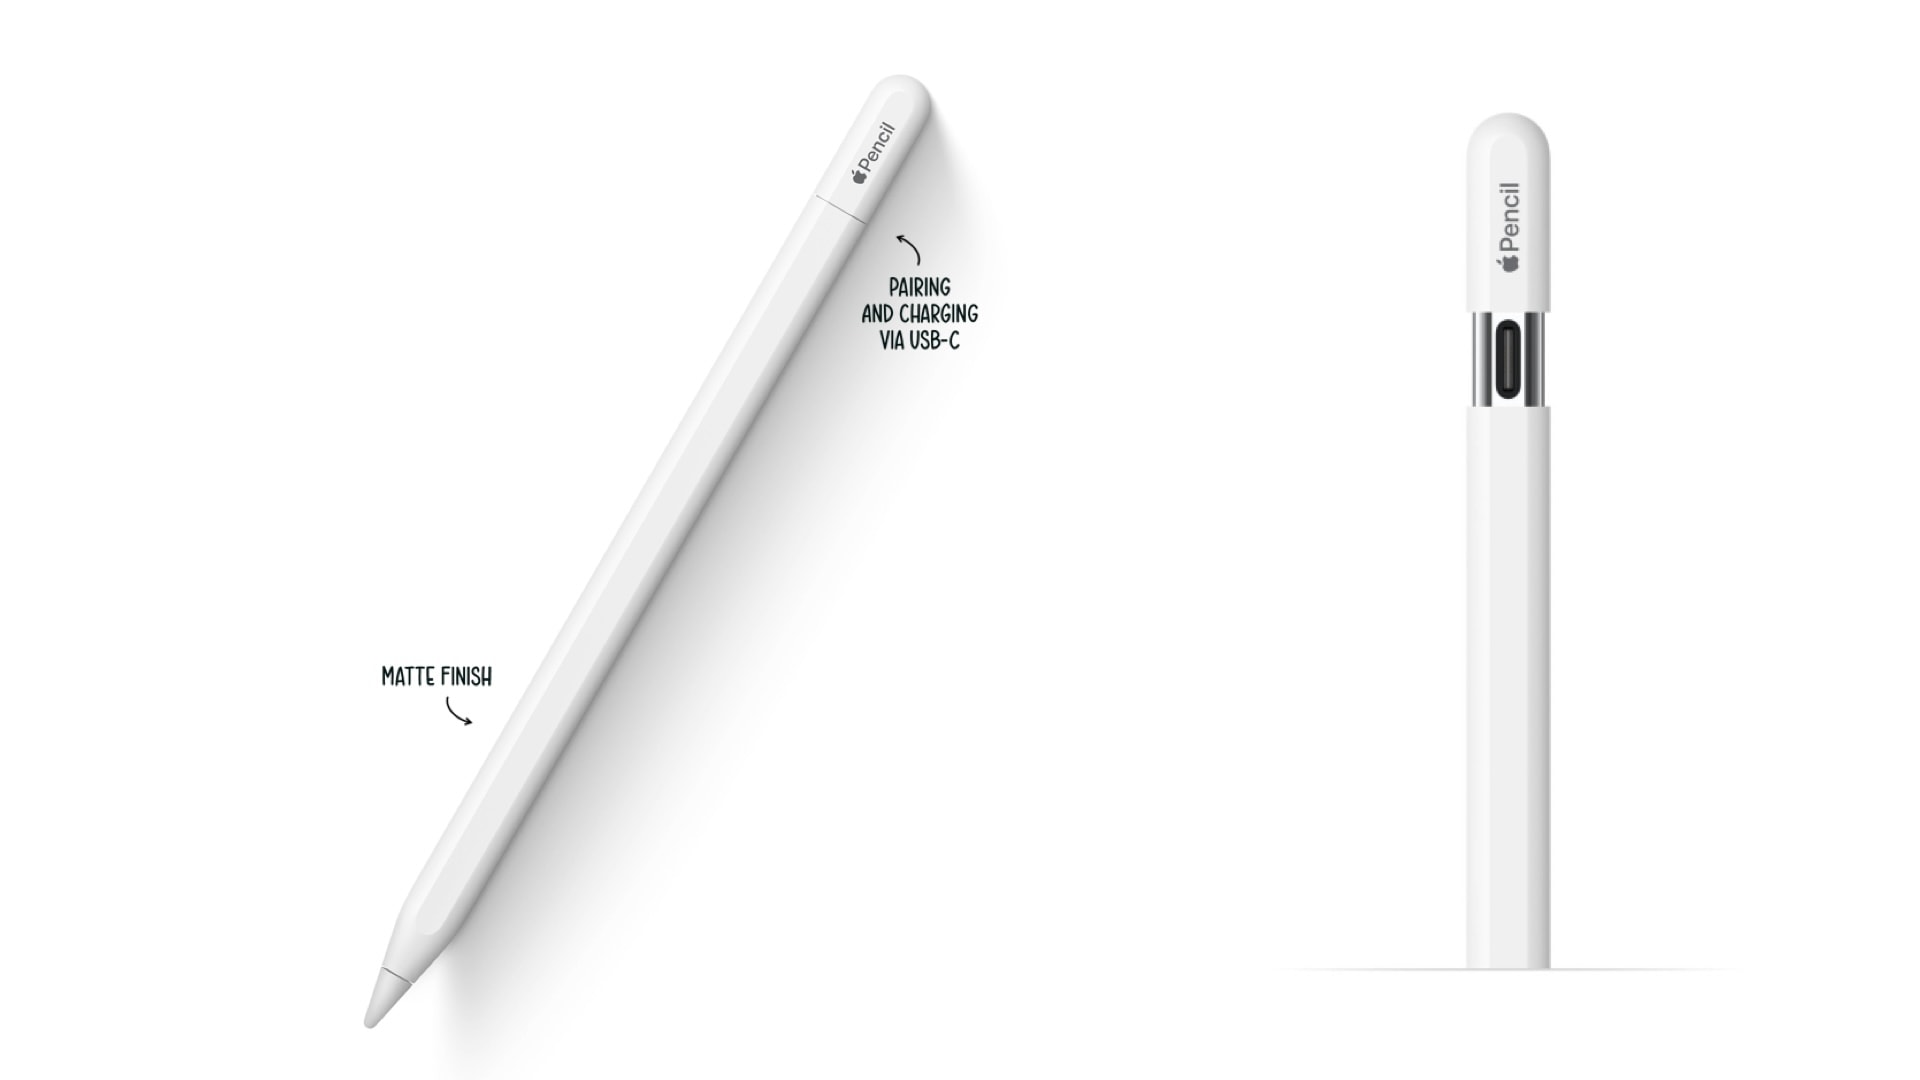 The New Apple Pencil USB-C. What's Different? But, Why Apple? 